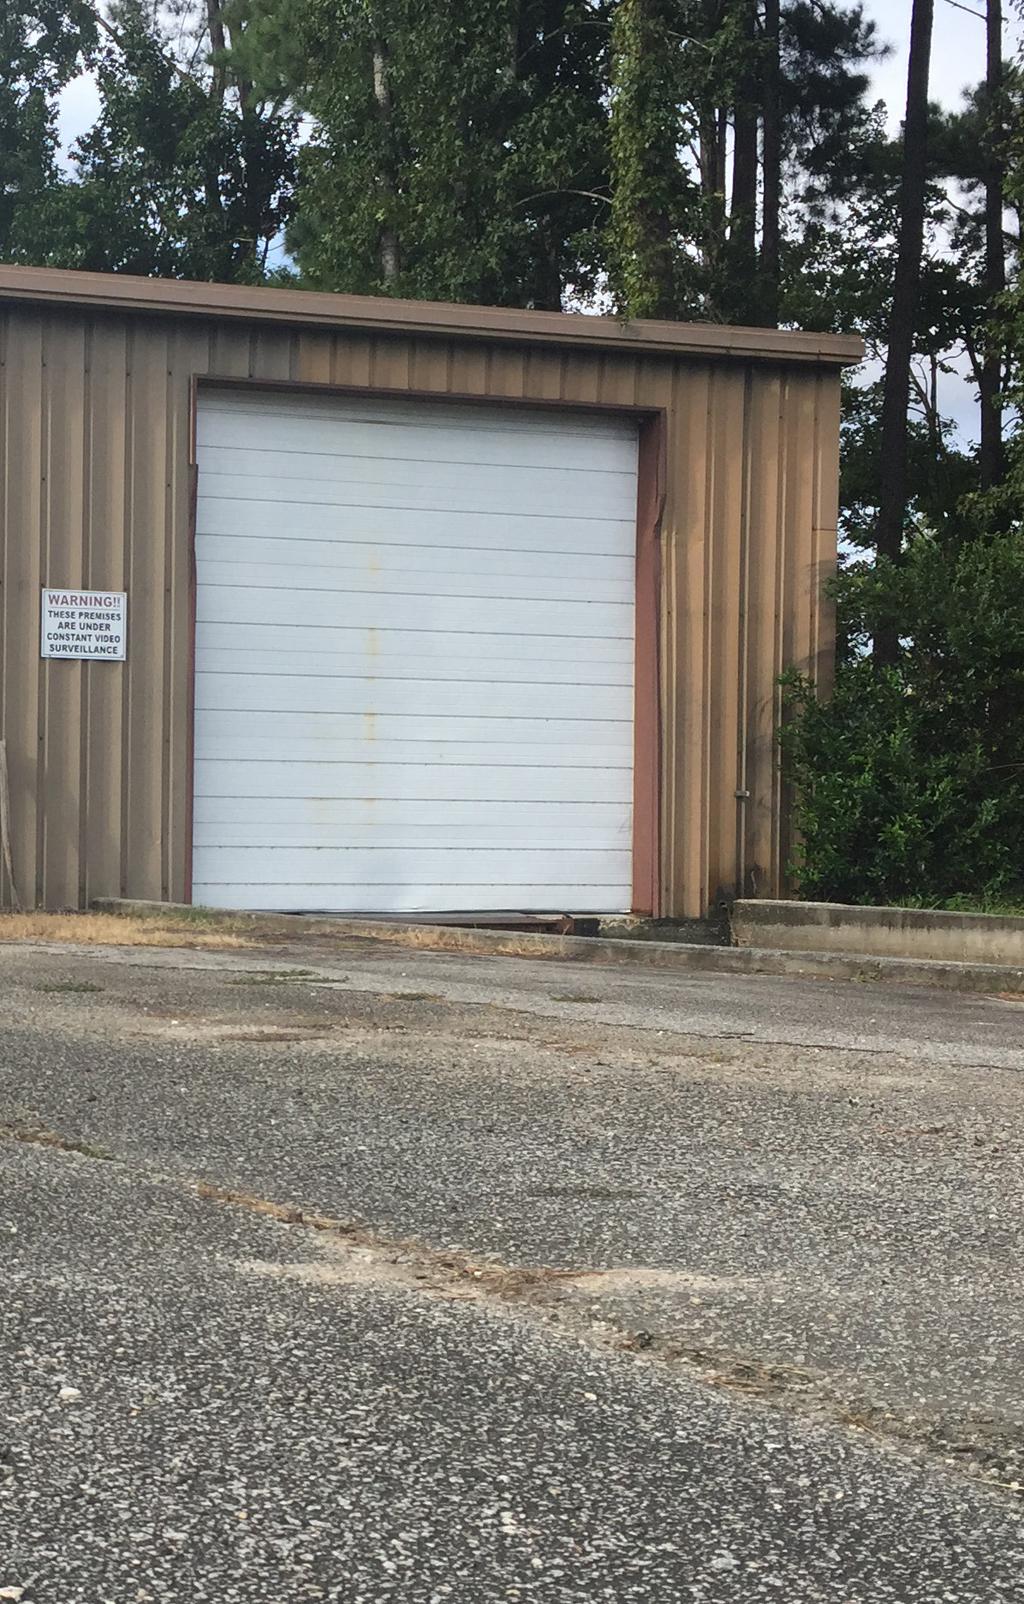 8,650 SF of freestading warehouse building conveniently located in Pepperdamn Industrial Park. The building comes with a functional 675 sf office layout, a 12 x 12 drive in, and 12 x 12 dock door.